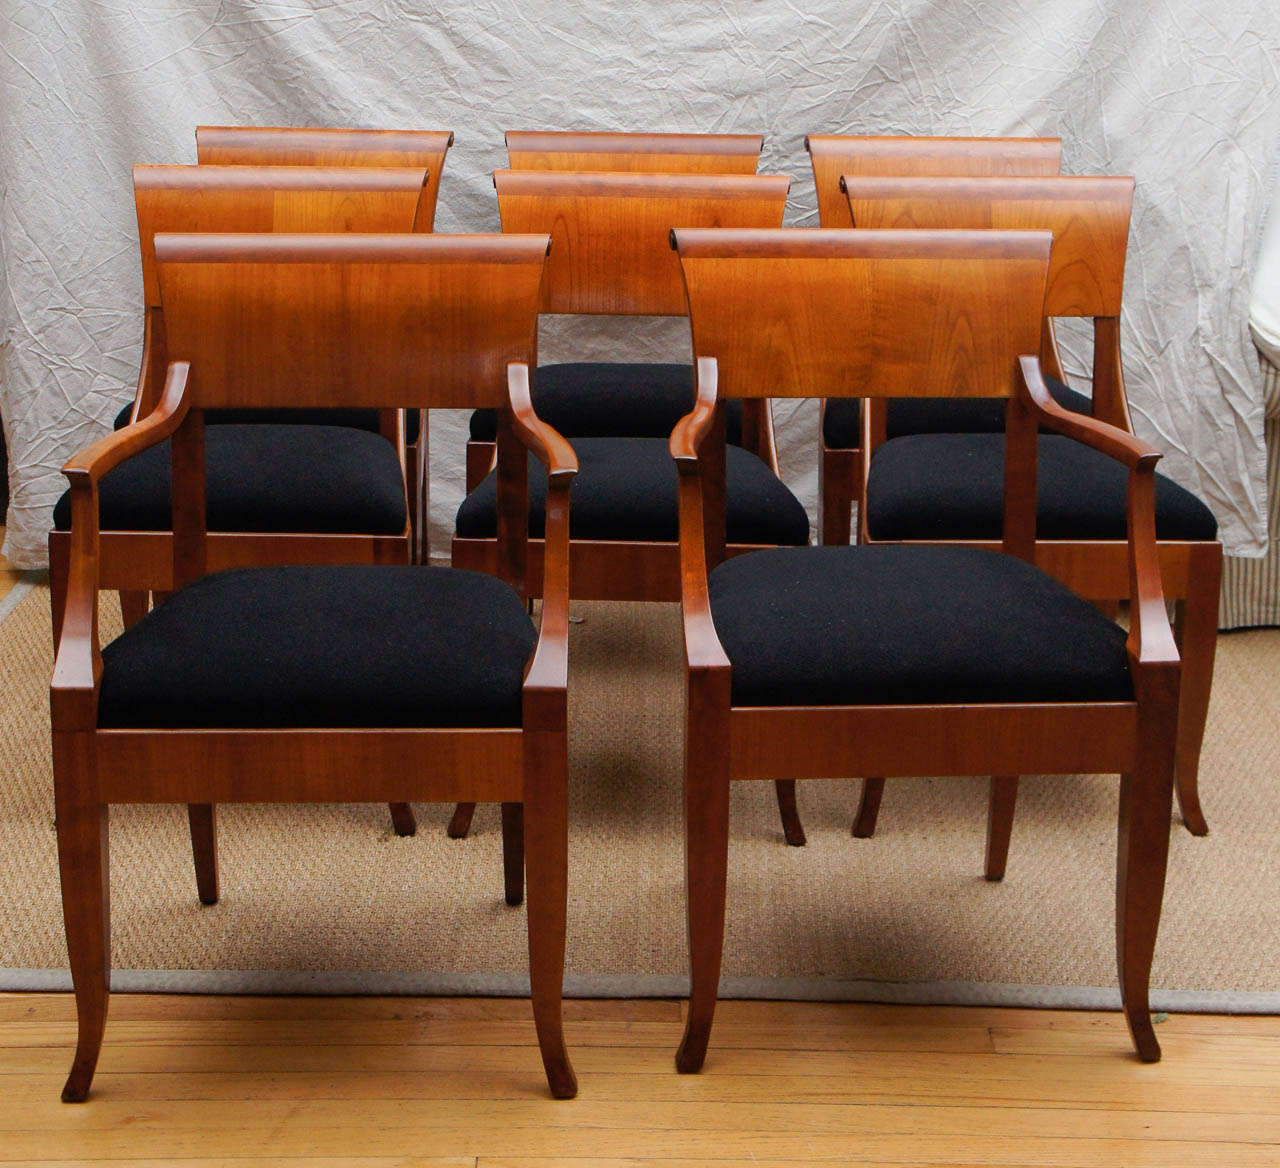 Set of eight Neoclassical dining chairs. Six sides, two arms. Italian fruitwood.

Dimensions:
33.75